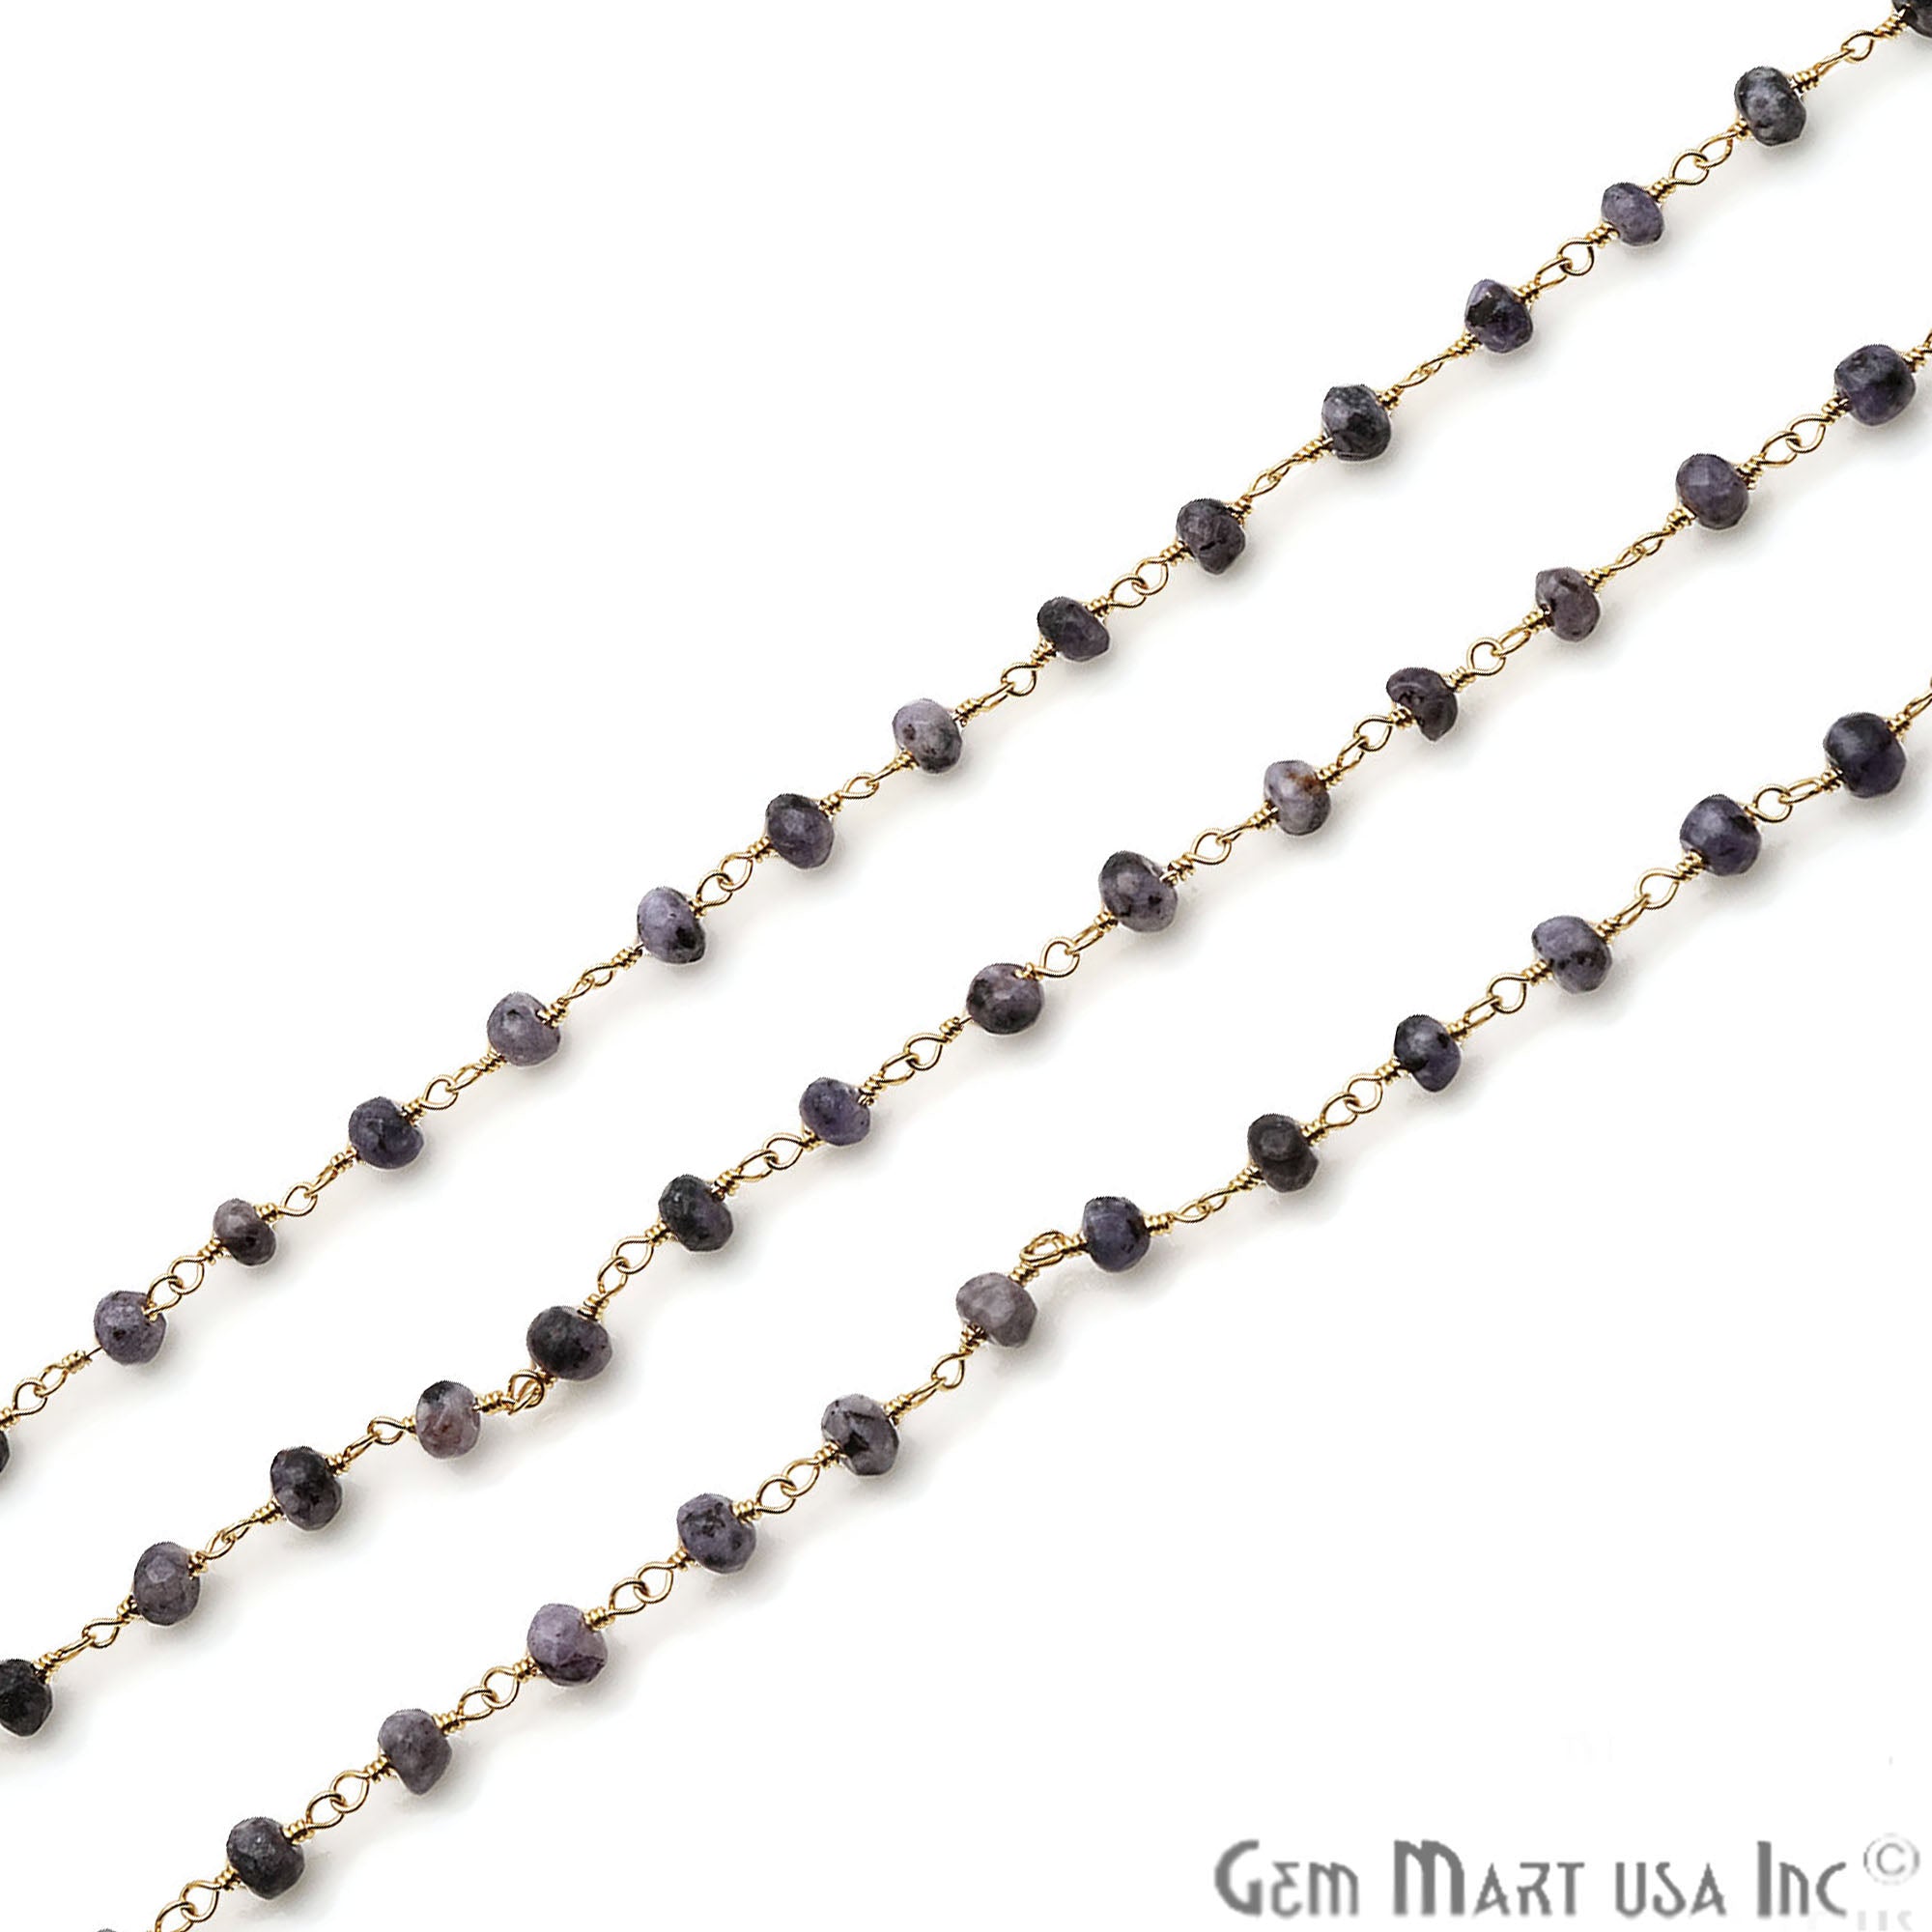 Lavender Quartz Jade Faceted Beads 4mm Gold Plated Wire Wrapped Rosary Chain - GemMartUSA